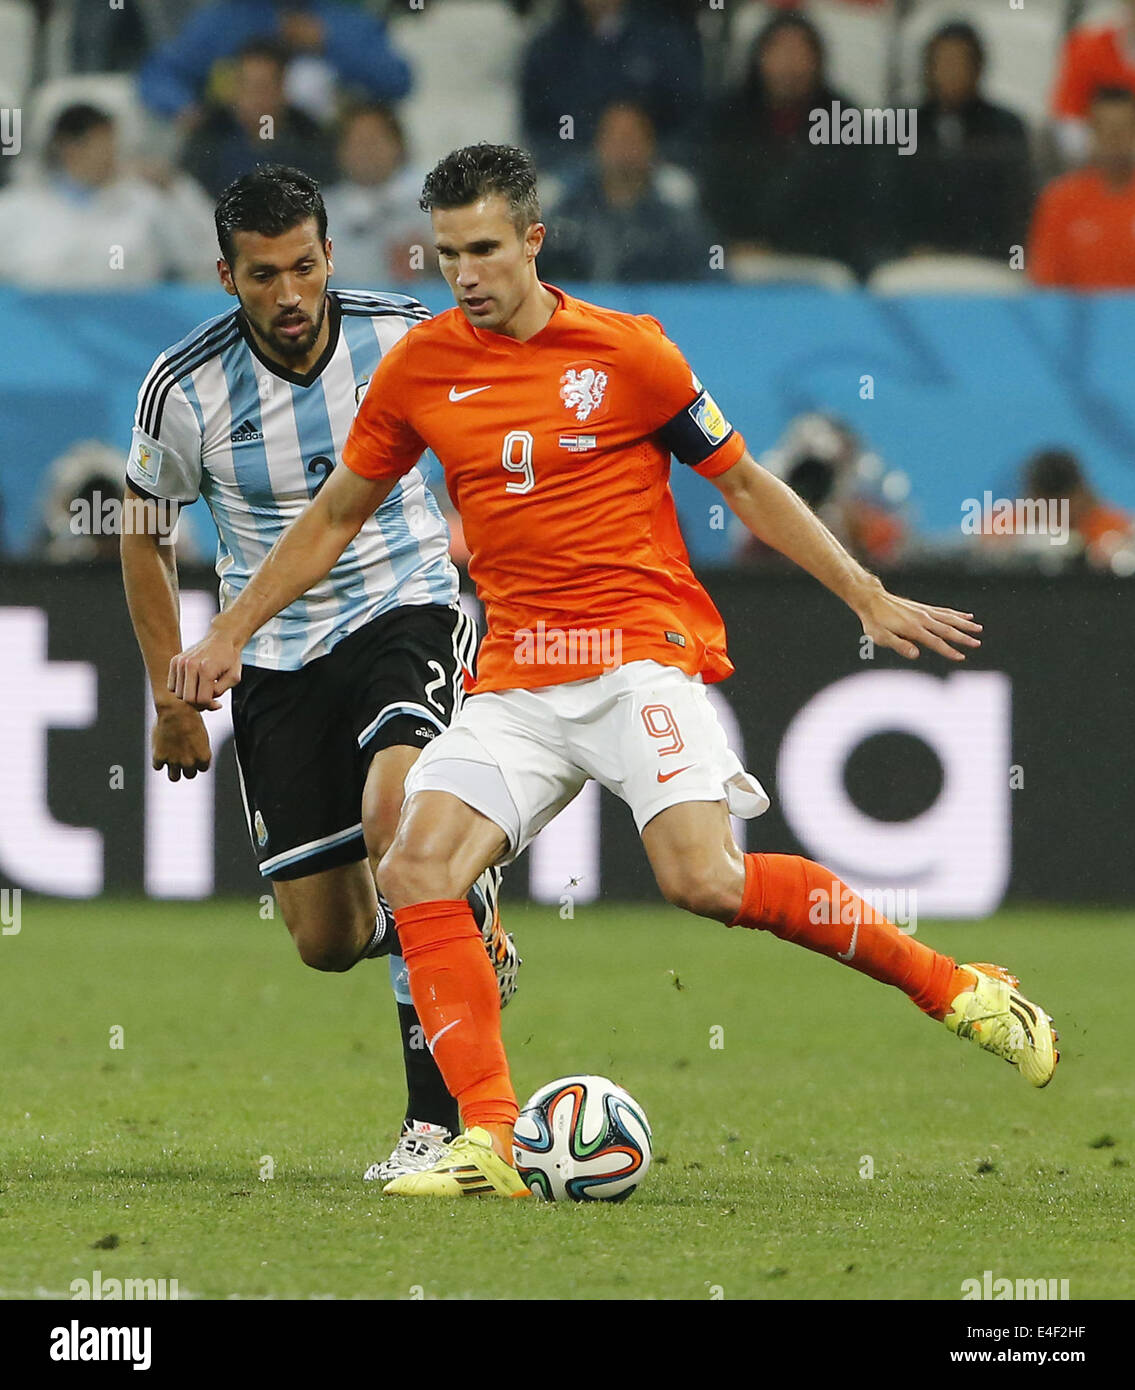 Sao Paulo, Brazil. 9th July, 2014. Netherlands' Robin van Persie (R) controls the ball against Argentina's Ezequiel Garay during a semifinal match between Netherlands and Argentina of 2014 FIFA World Cup at the Arena de Sao Paulo Stadium in Sao Paulo, Brazil, on July 9, 2014. Credit:  Zhou Lei/Xinhua/Alamy Live News Stock Photo